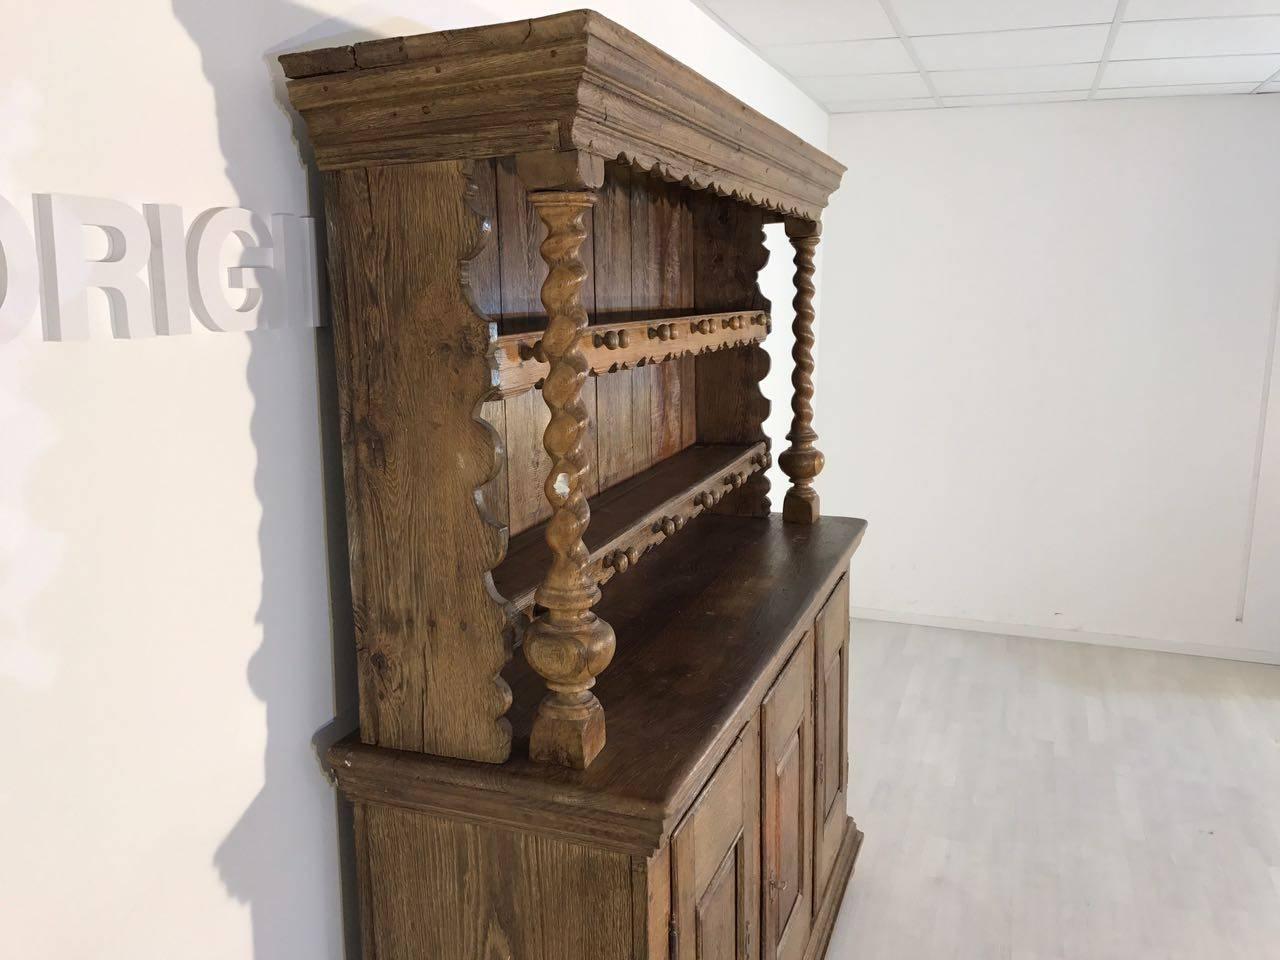 A solid cane cabinet. Striking are the beautiful ornaments above and the twisted columns on the sides. The waxed oak gives the piece a special old-fashioned touch. The piece includes original locks and keys which are in a good condition. With the